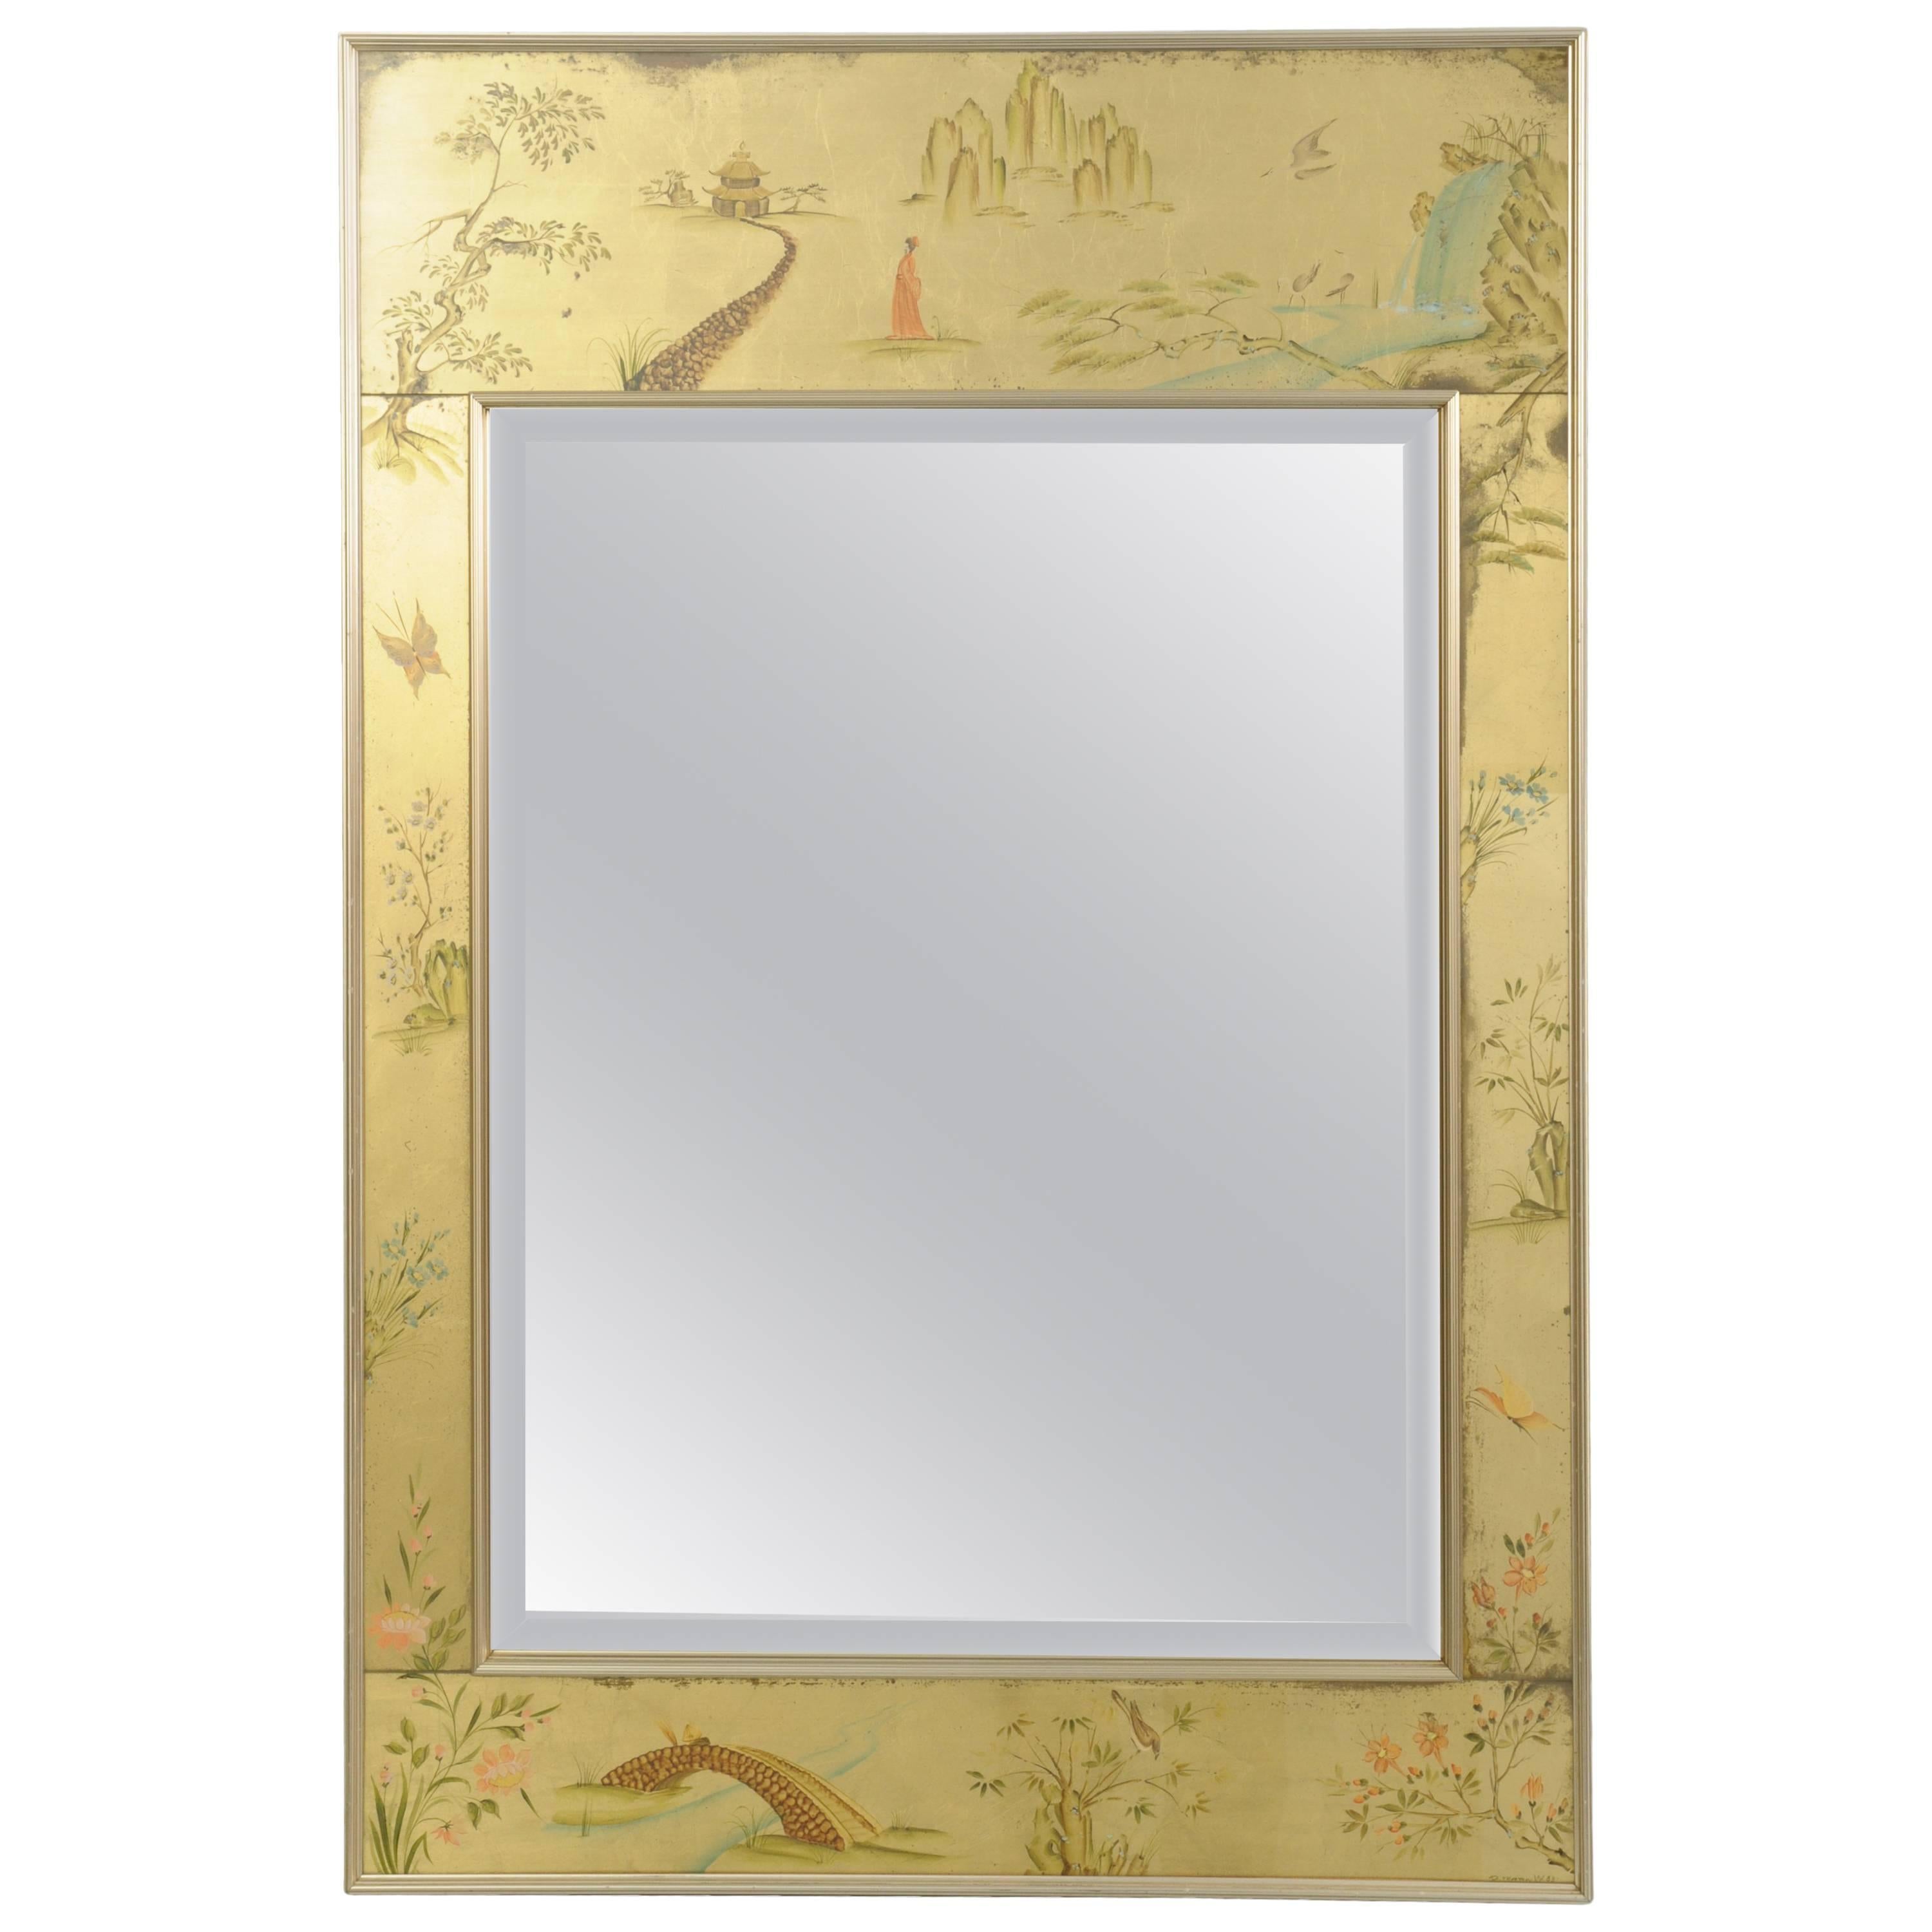 Labarge Chinoiserie Style Gold Églomisé Wall Mirror Reverse Painted Asian Signed